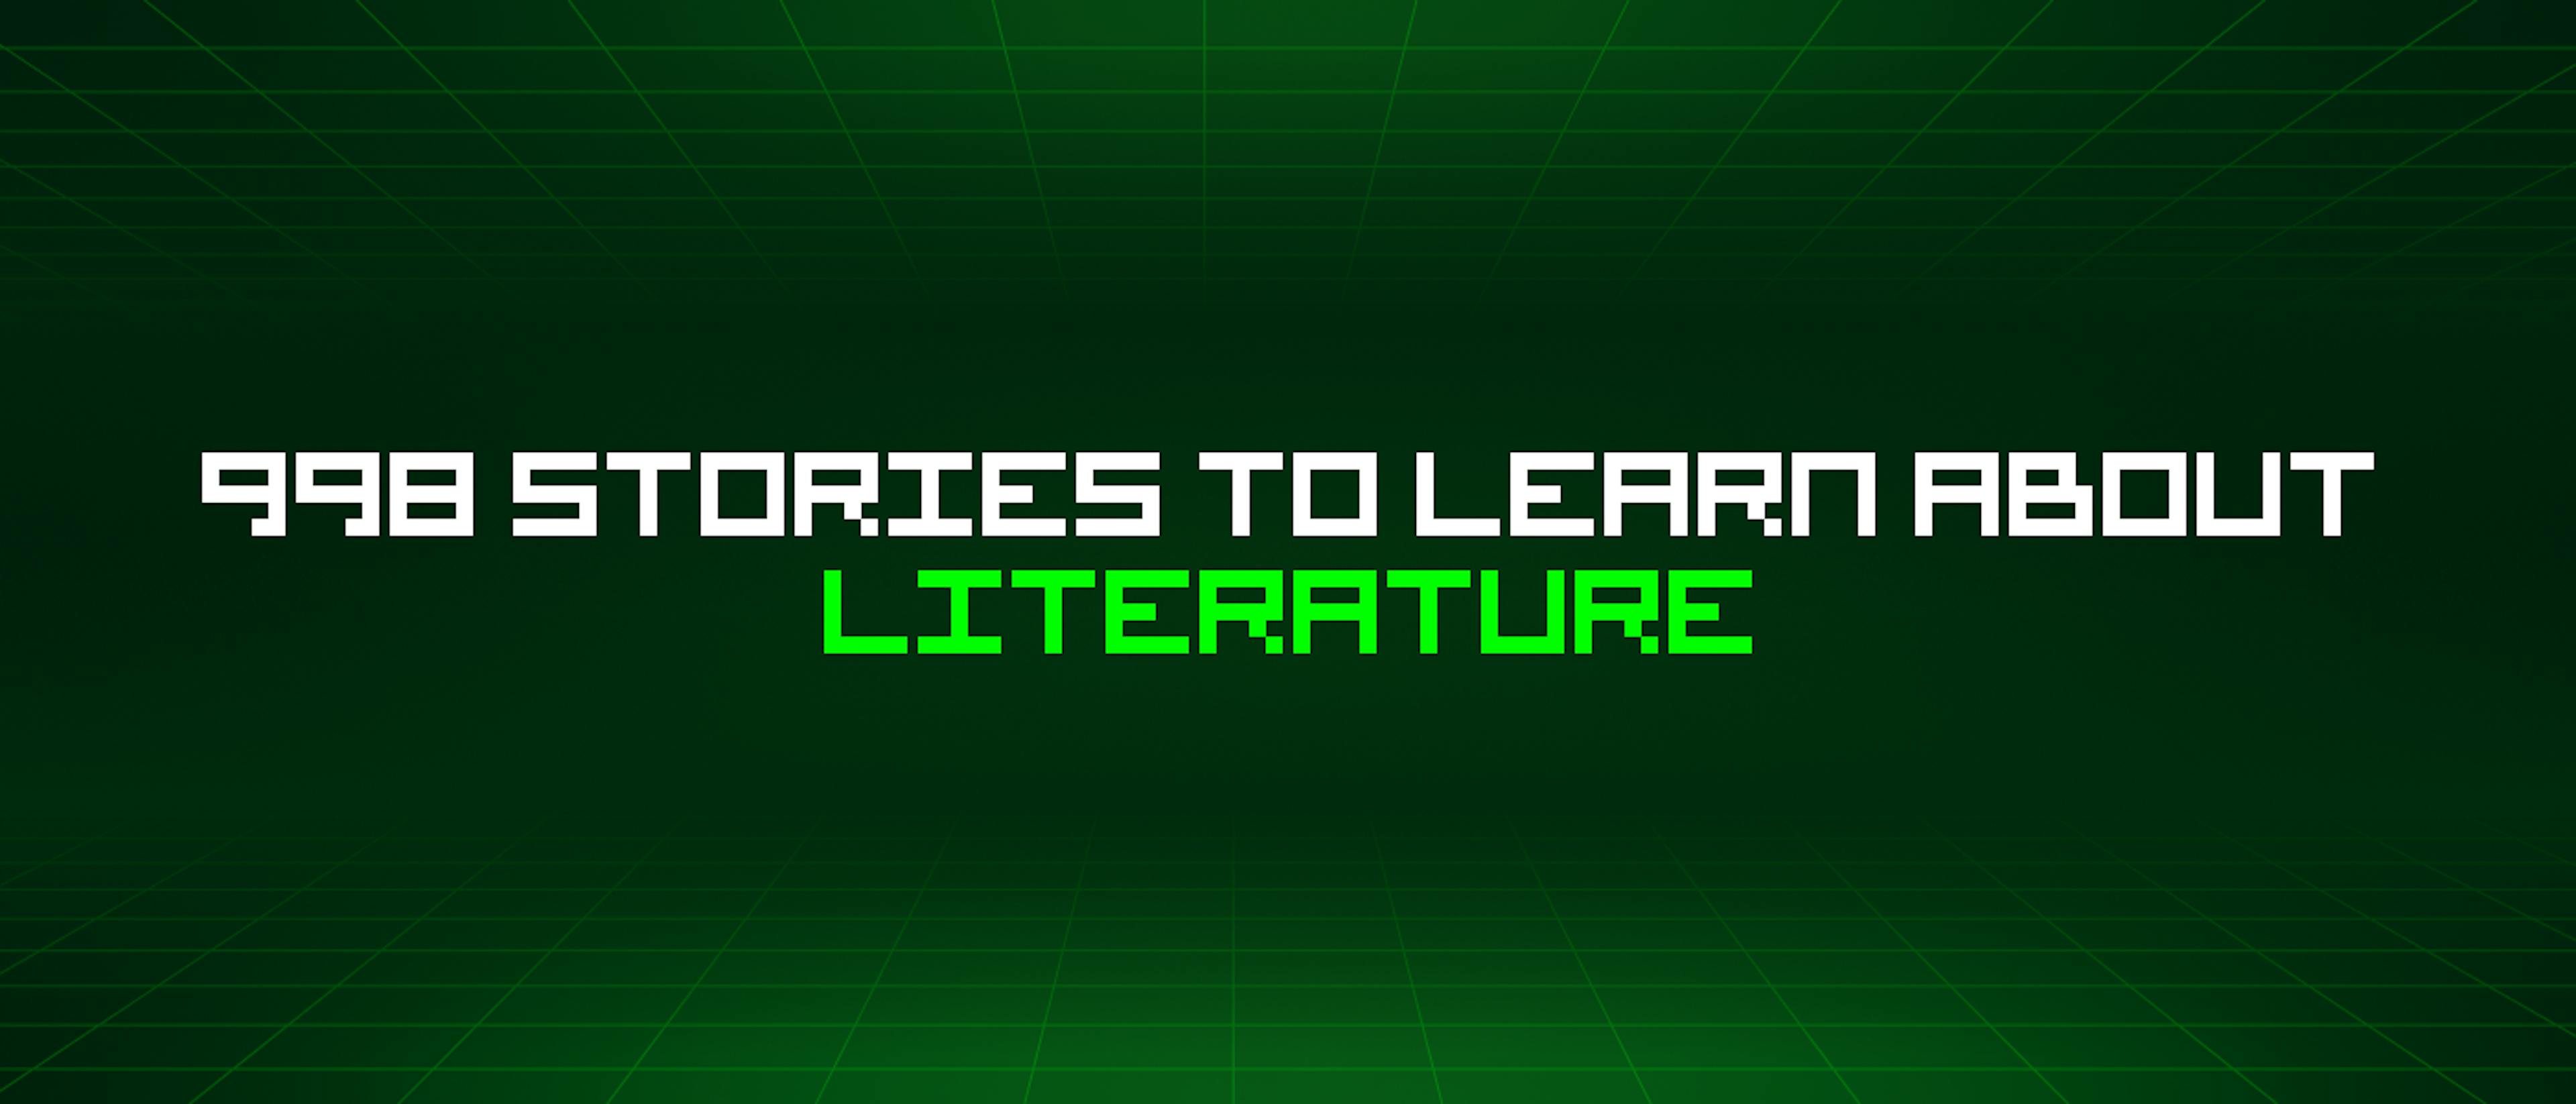 featured image - 998 Stories To Learn About Literature